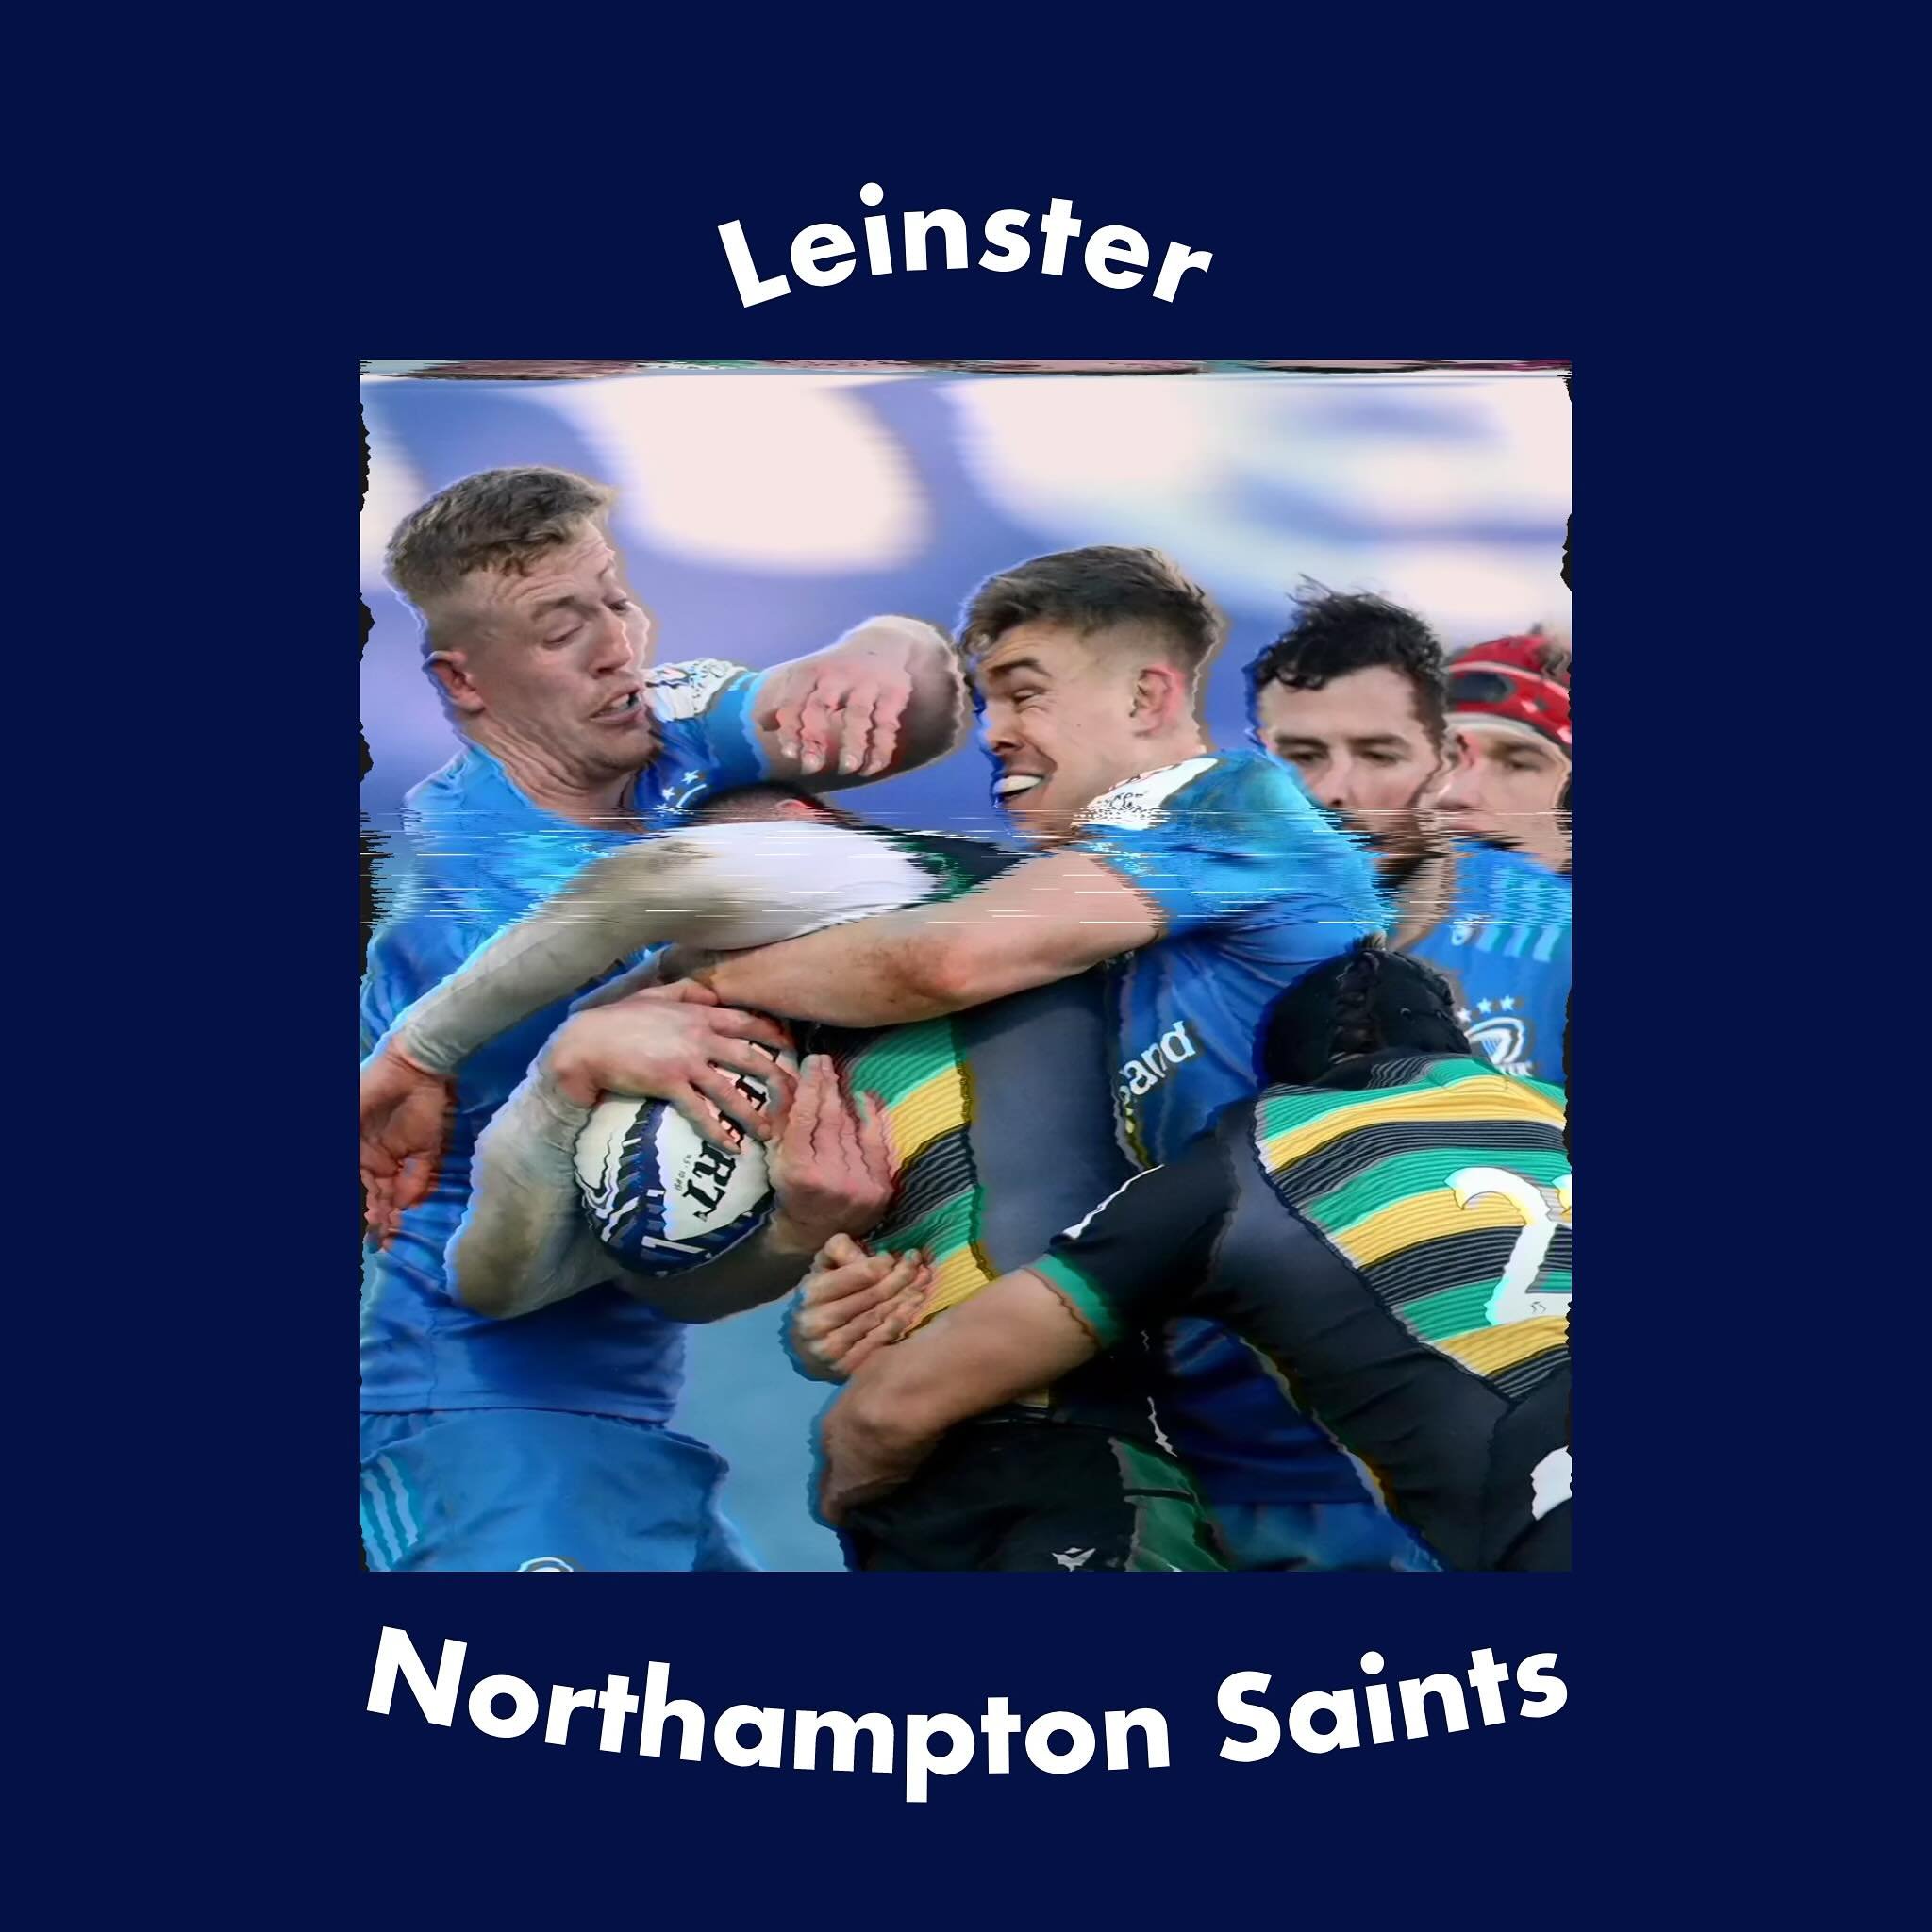 🎖️Reserve Tables at Thecircular.ie
We&rsquo;ll have Leinster v Northampton live from Croke Pk this Saturday. 
4 rooms / 7 screens.